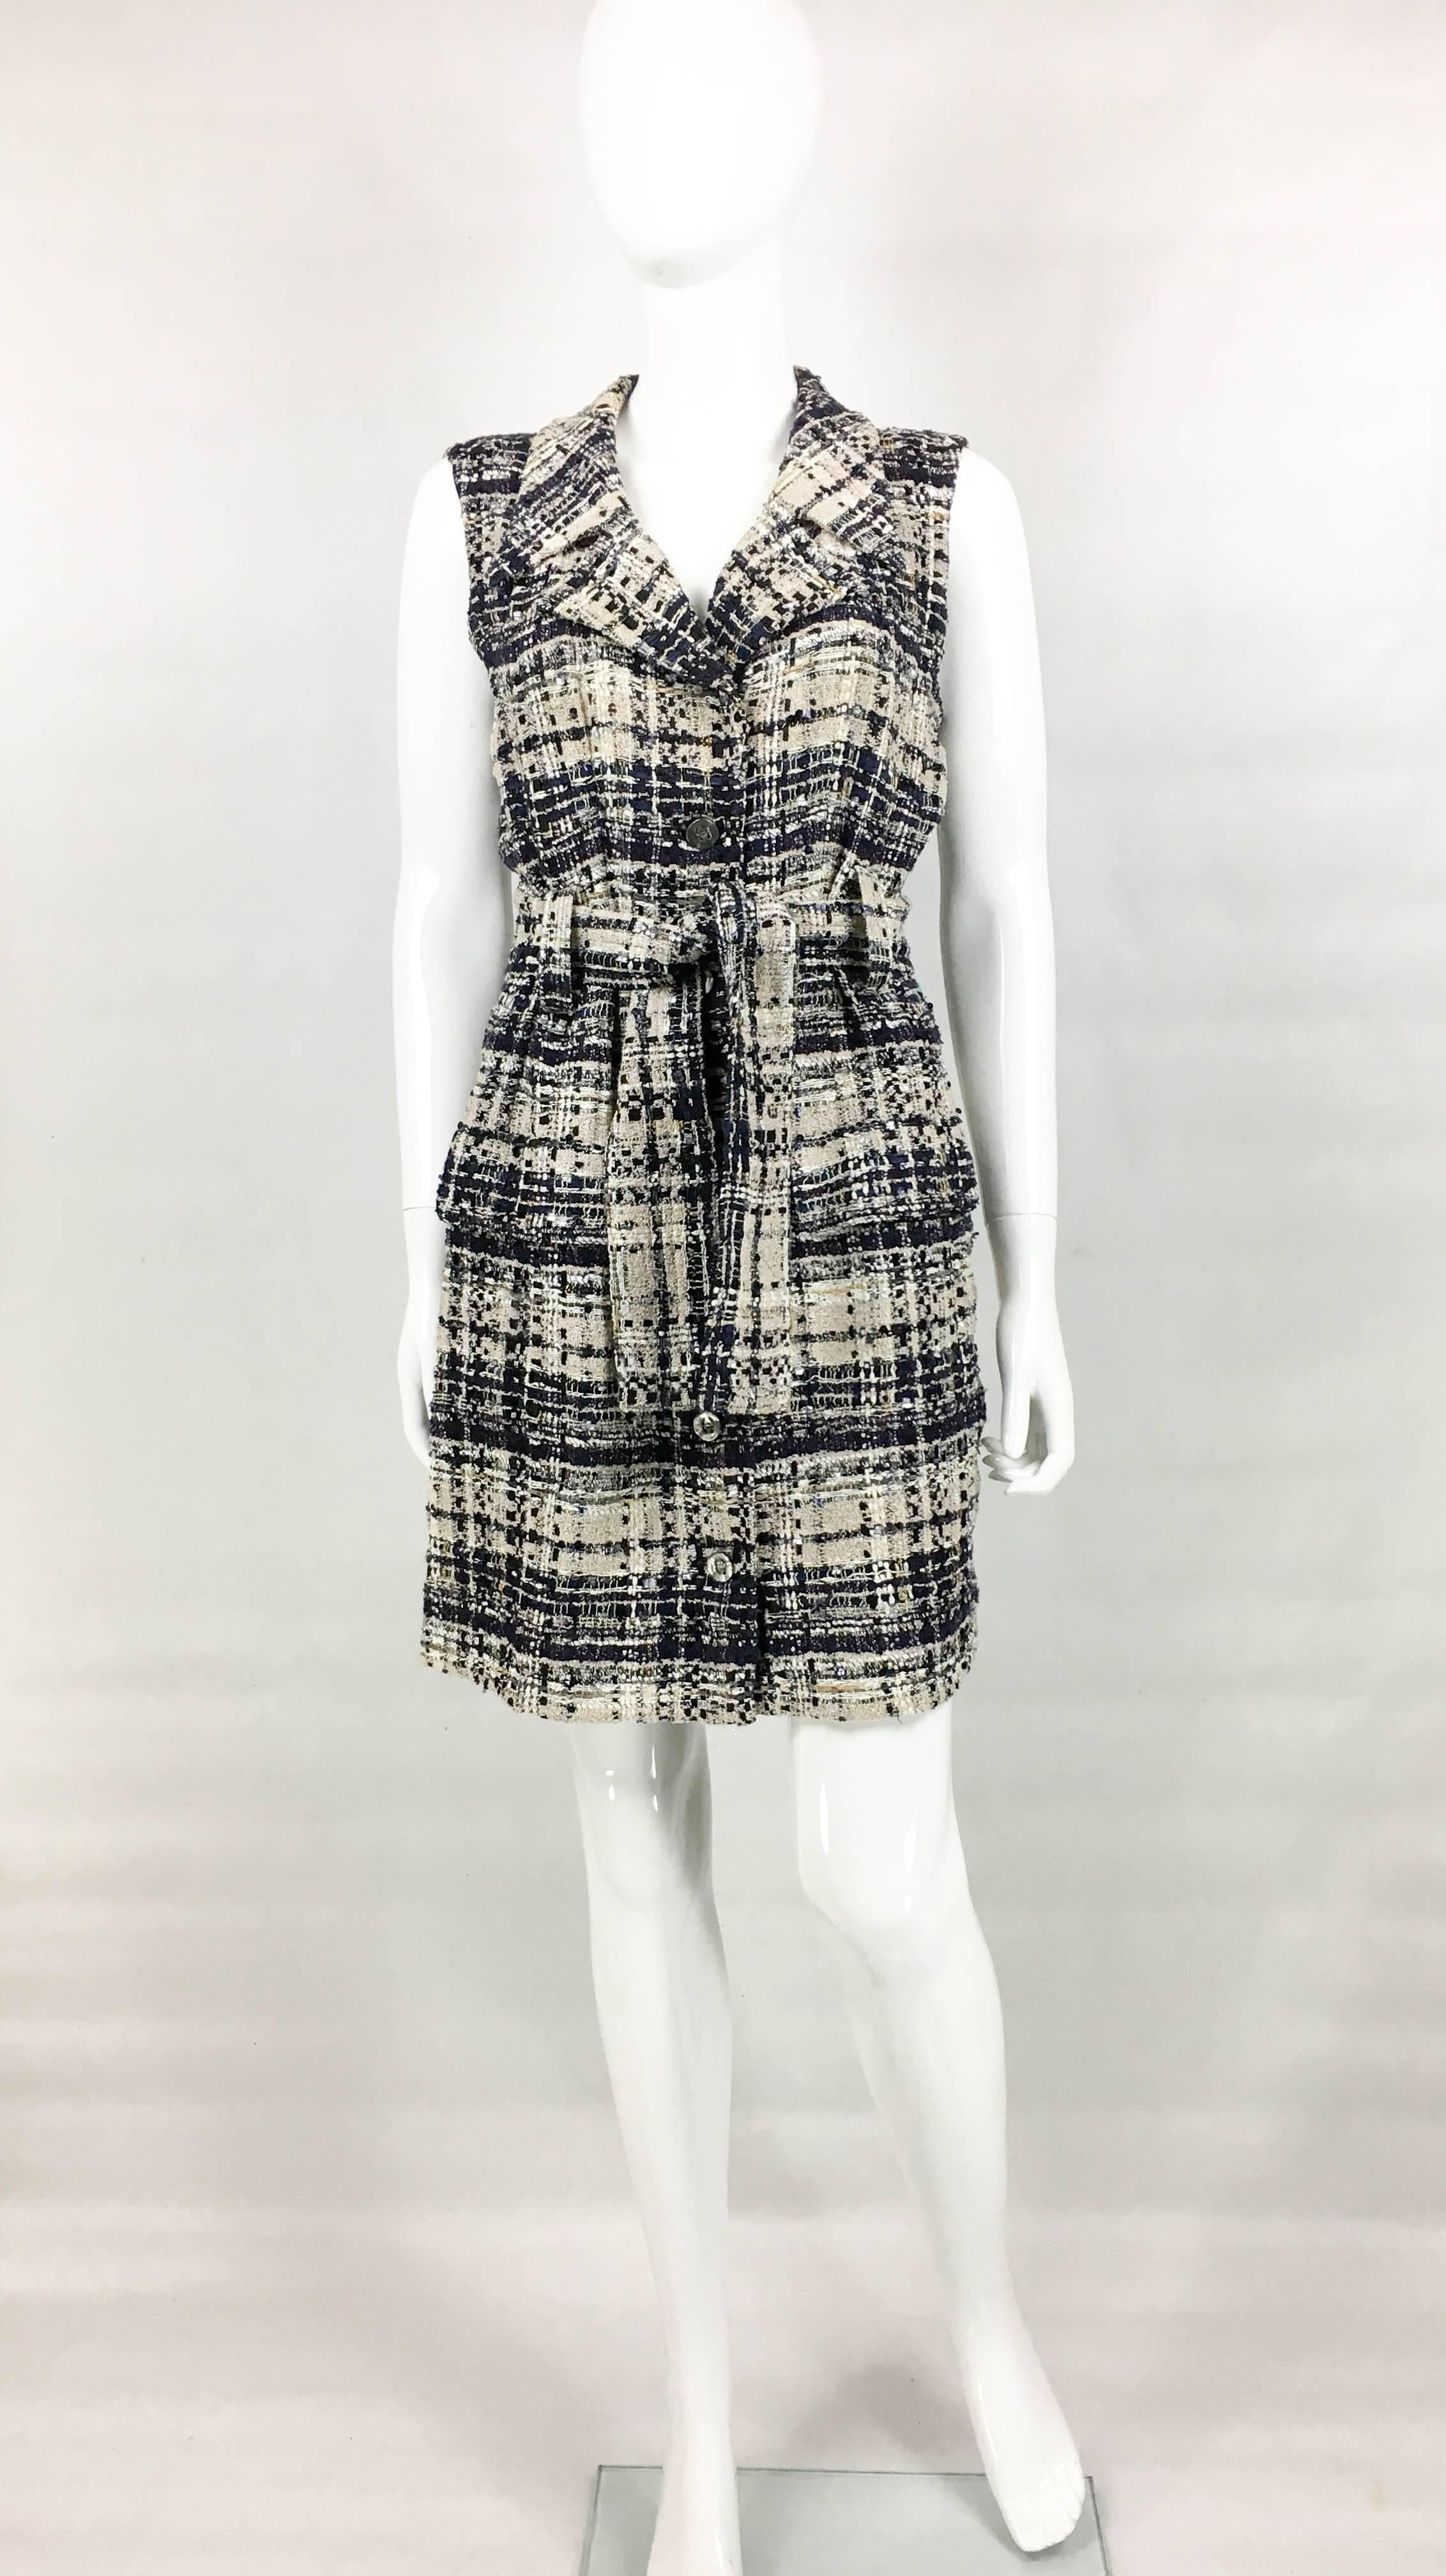 Chanel Belted Bouclé Shirt Dress. This striking dress by Chanel was created for the 2006 Spring / Summer Collection. Made in tweed bouclé masterfully blending black, navy, cream, silver, gold and bronze accents. There are 6 silver tone coin buttons